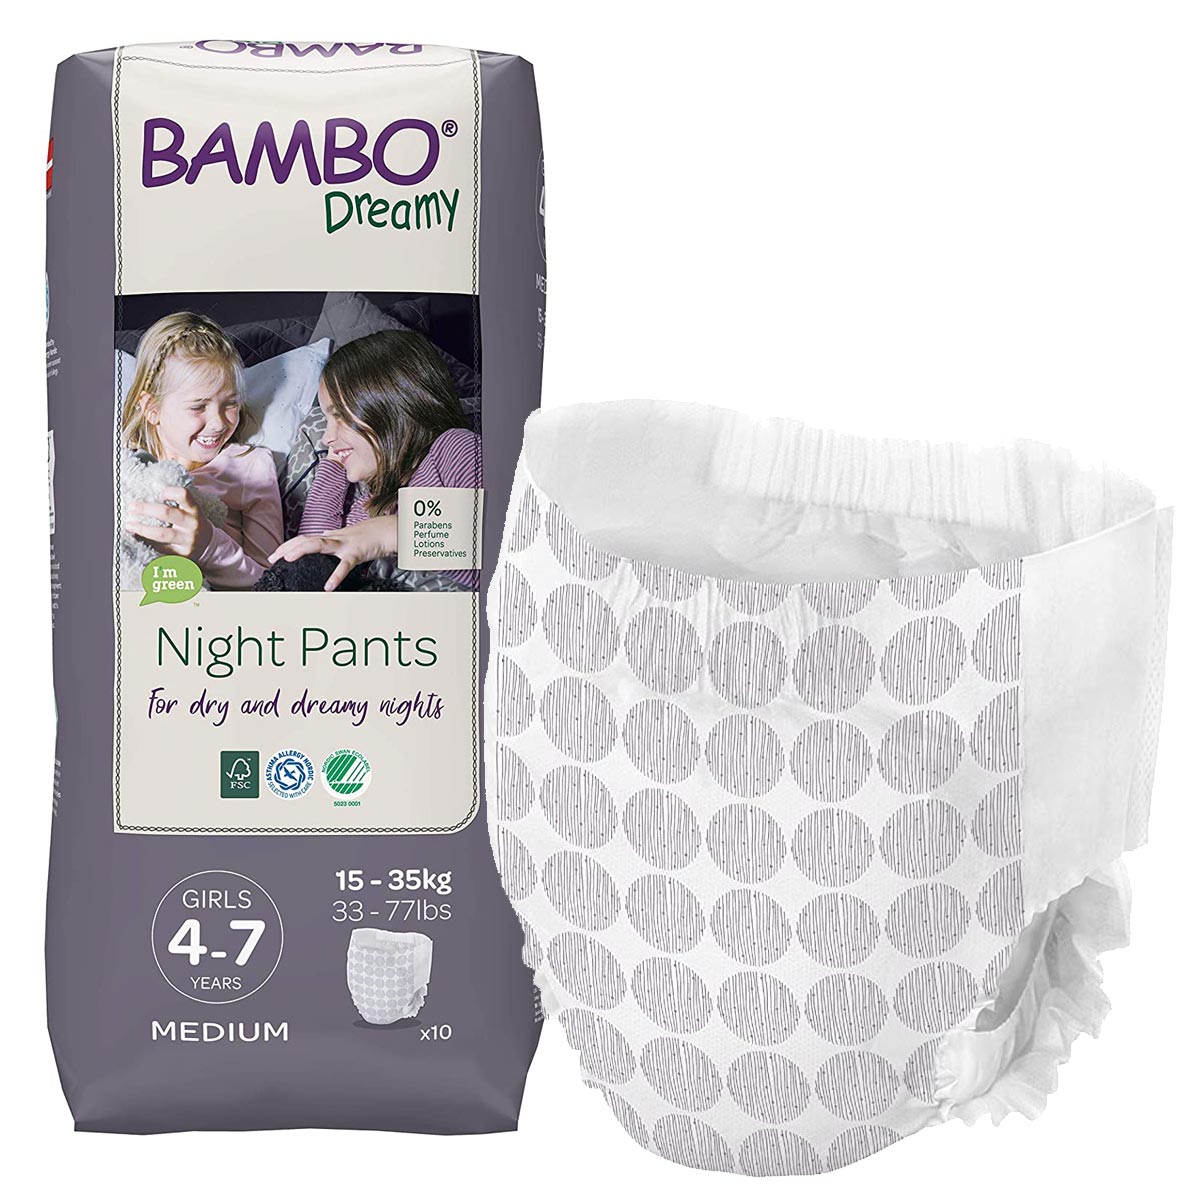 Bambo Dreamy - Night Pants Mädchen / Girl - 4 bis 7 Jahre (15-35 kg) - 10 St. Pack